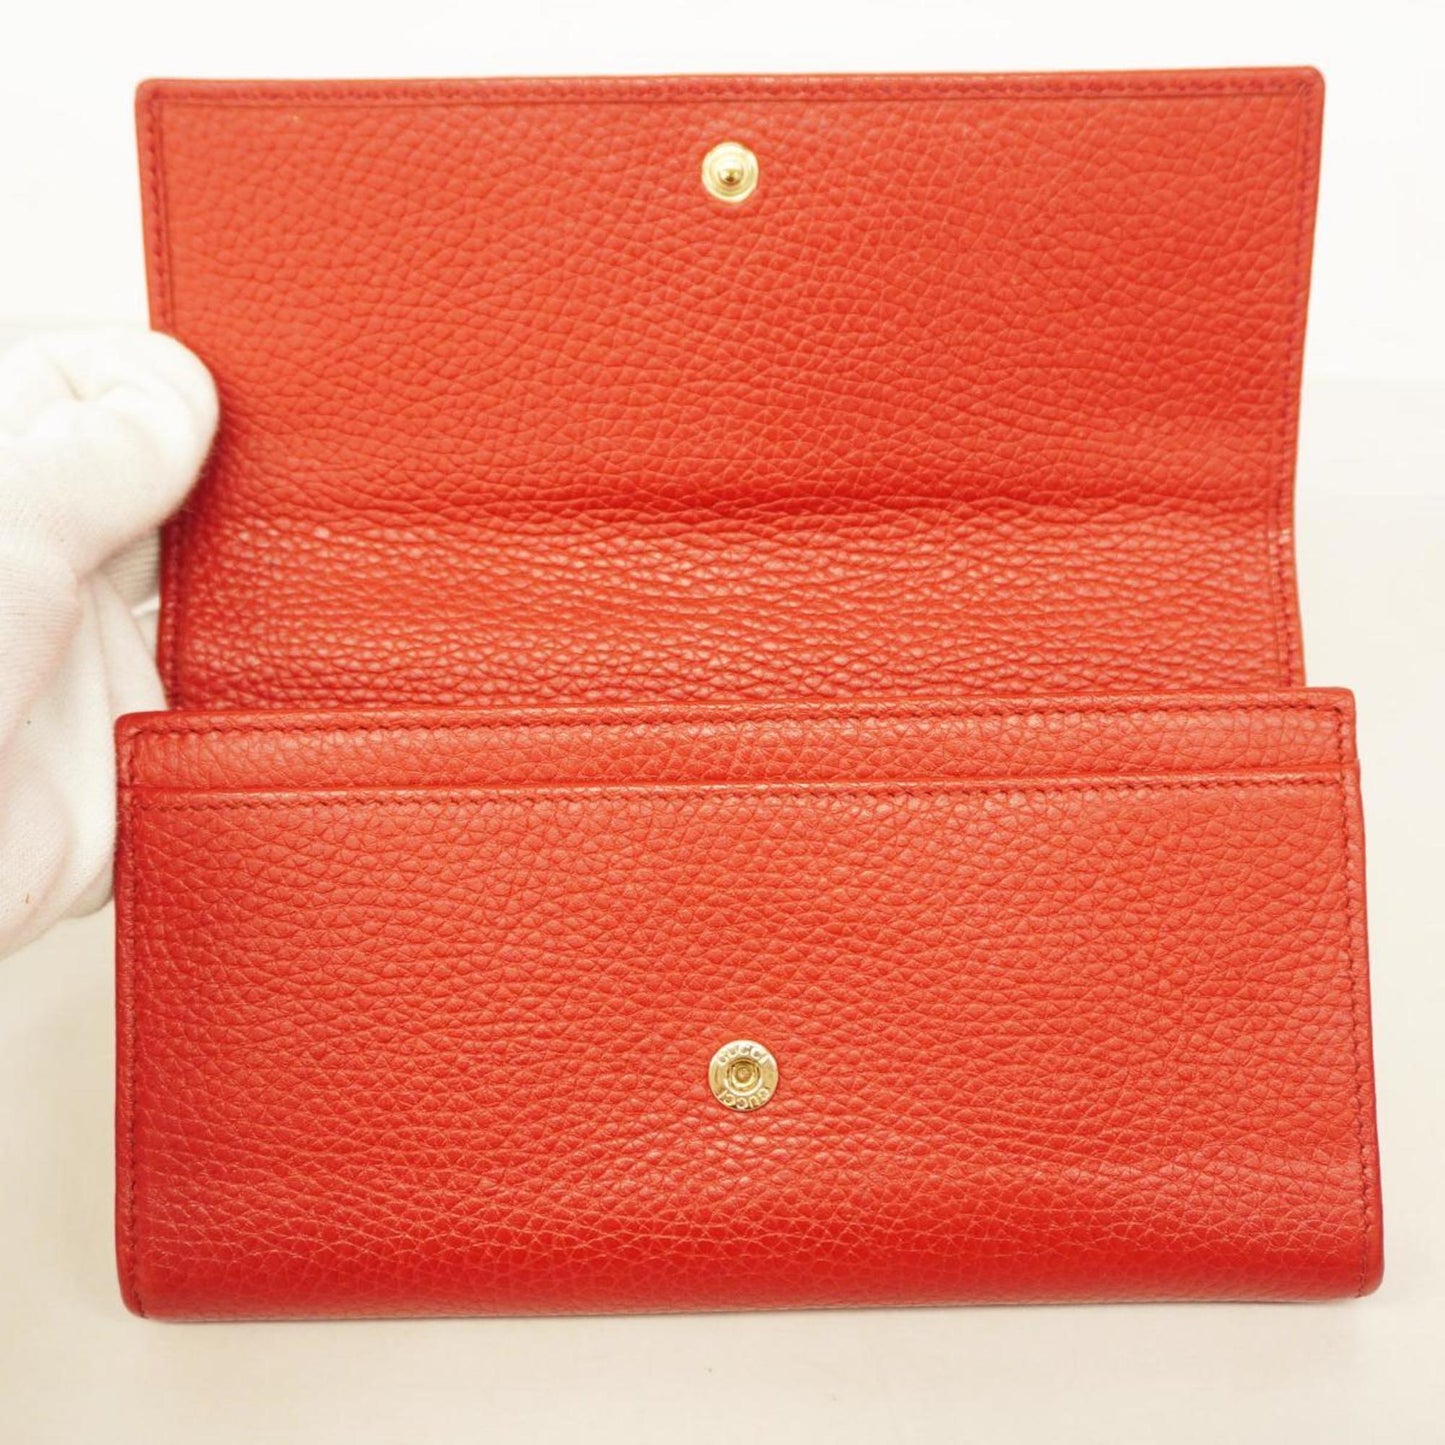 Gucci Soho Red Leather Wallet  (Pre-Owned)